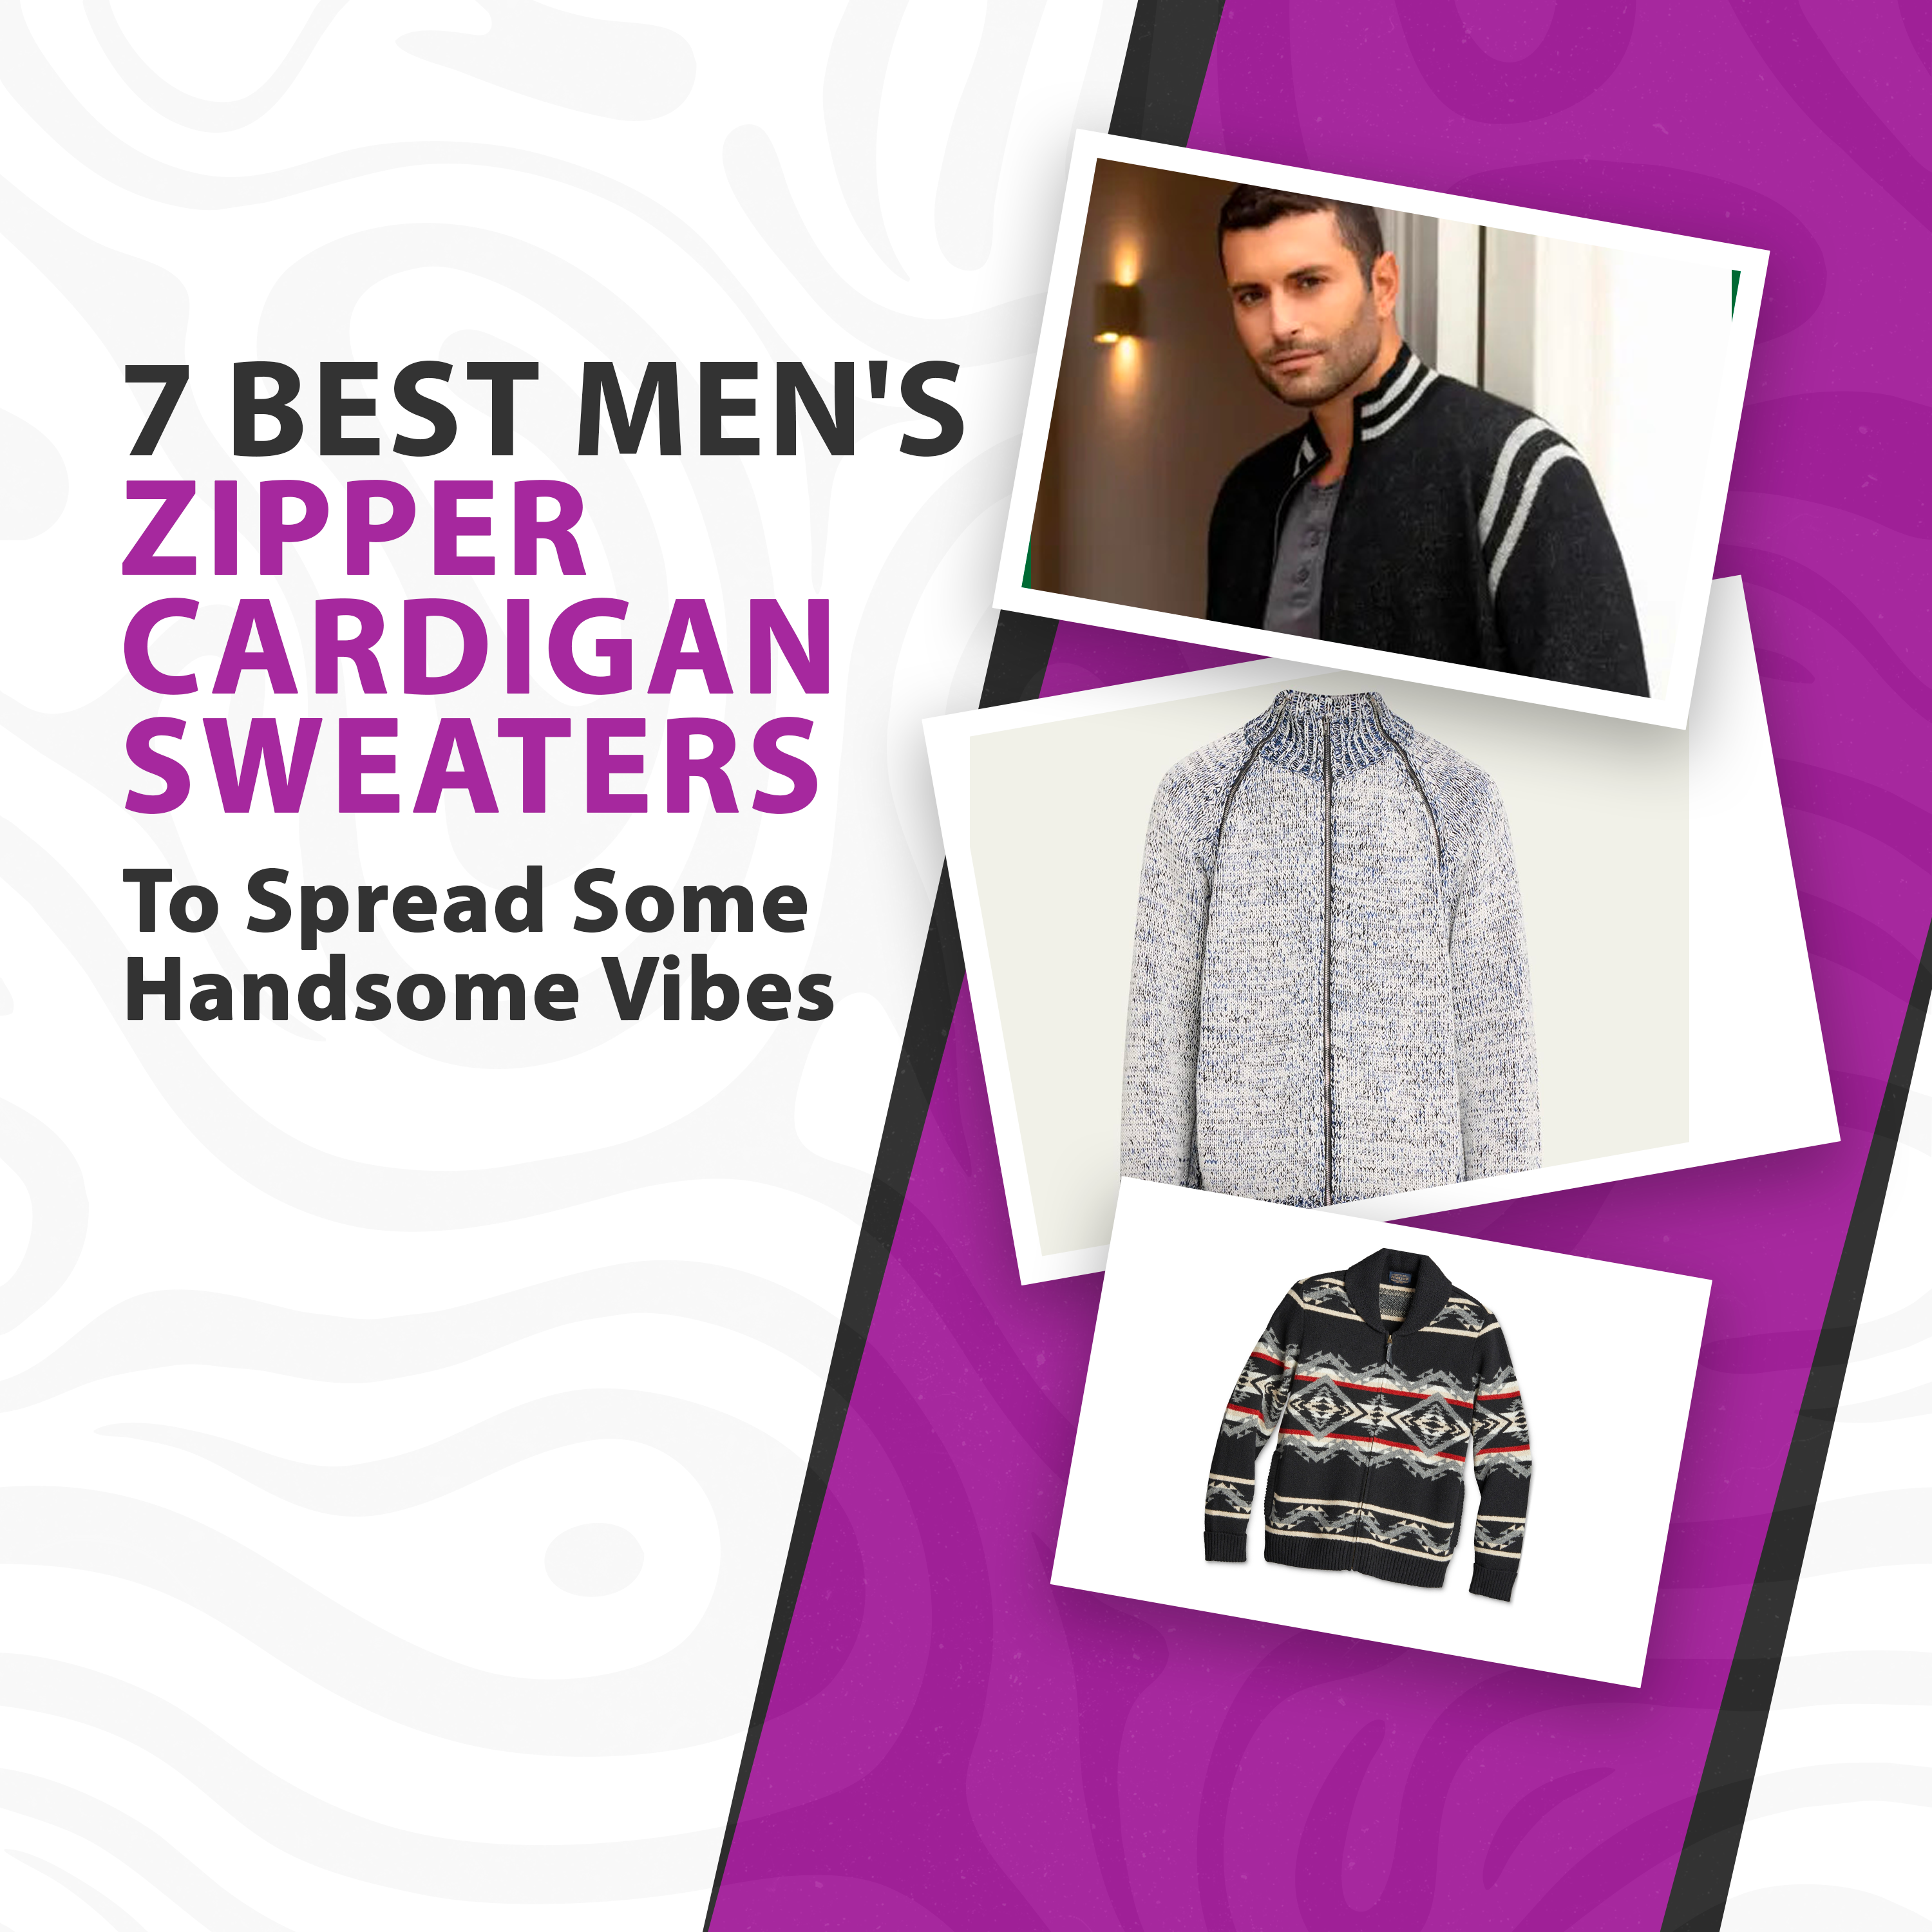 7 Best Men’s Zipper Cardigan Sweaters To Spread Some Handsome Vibes